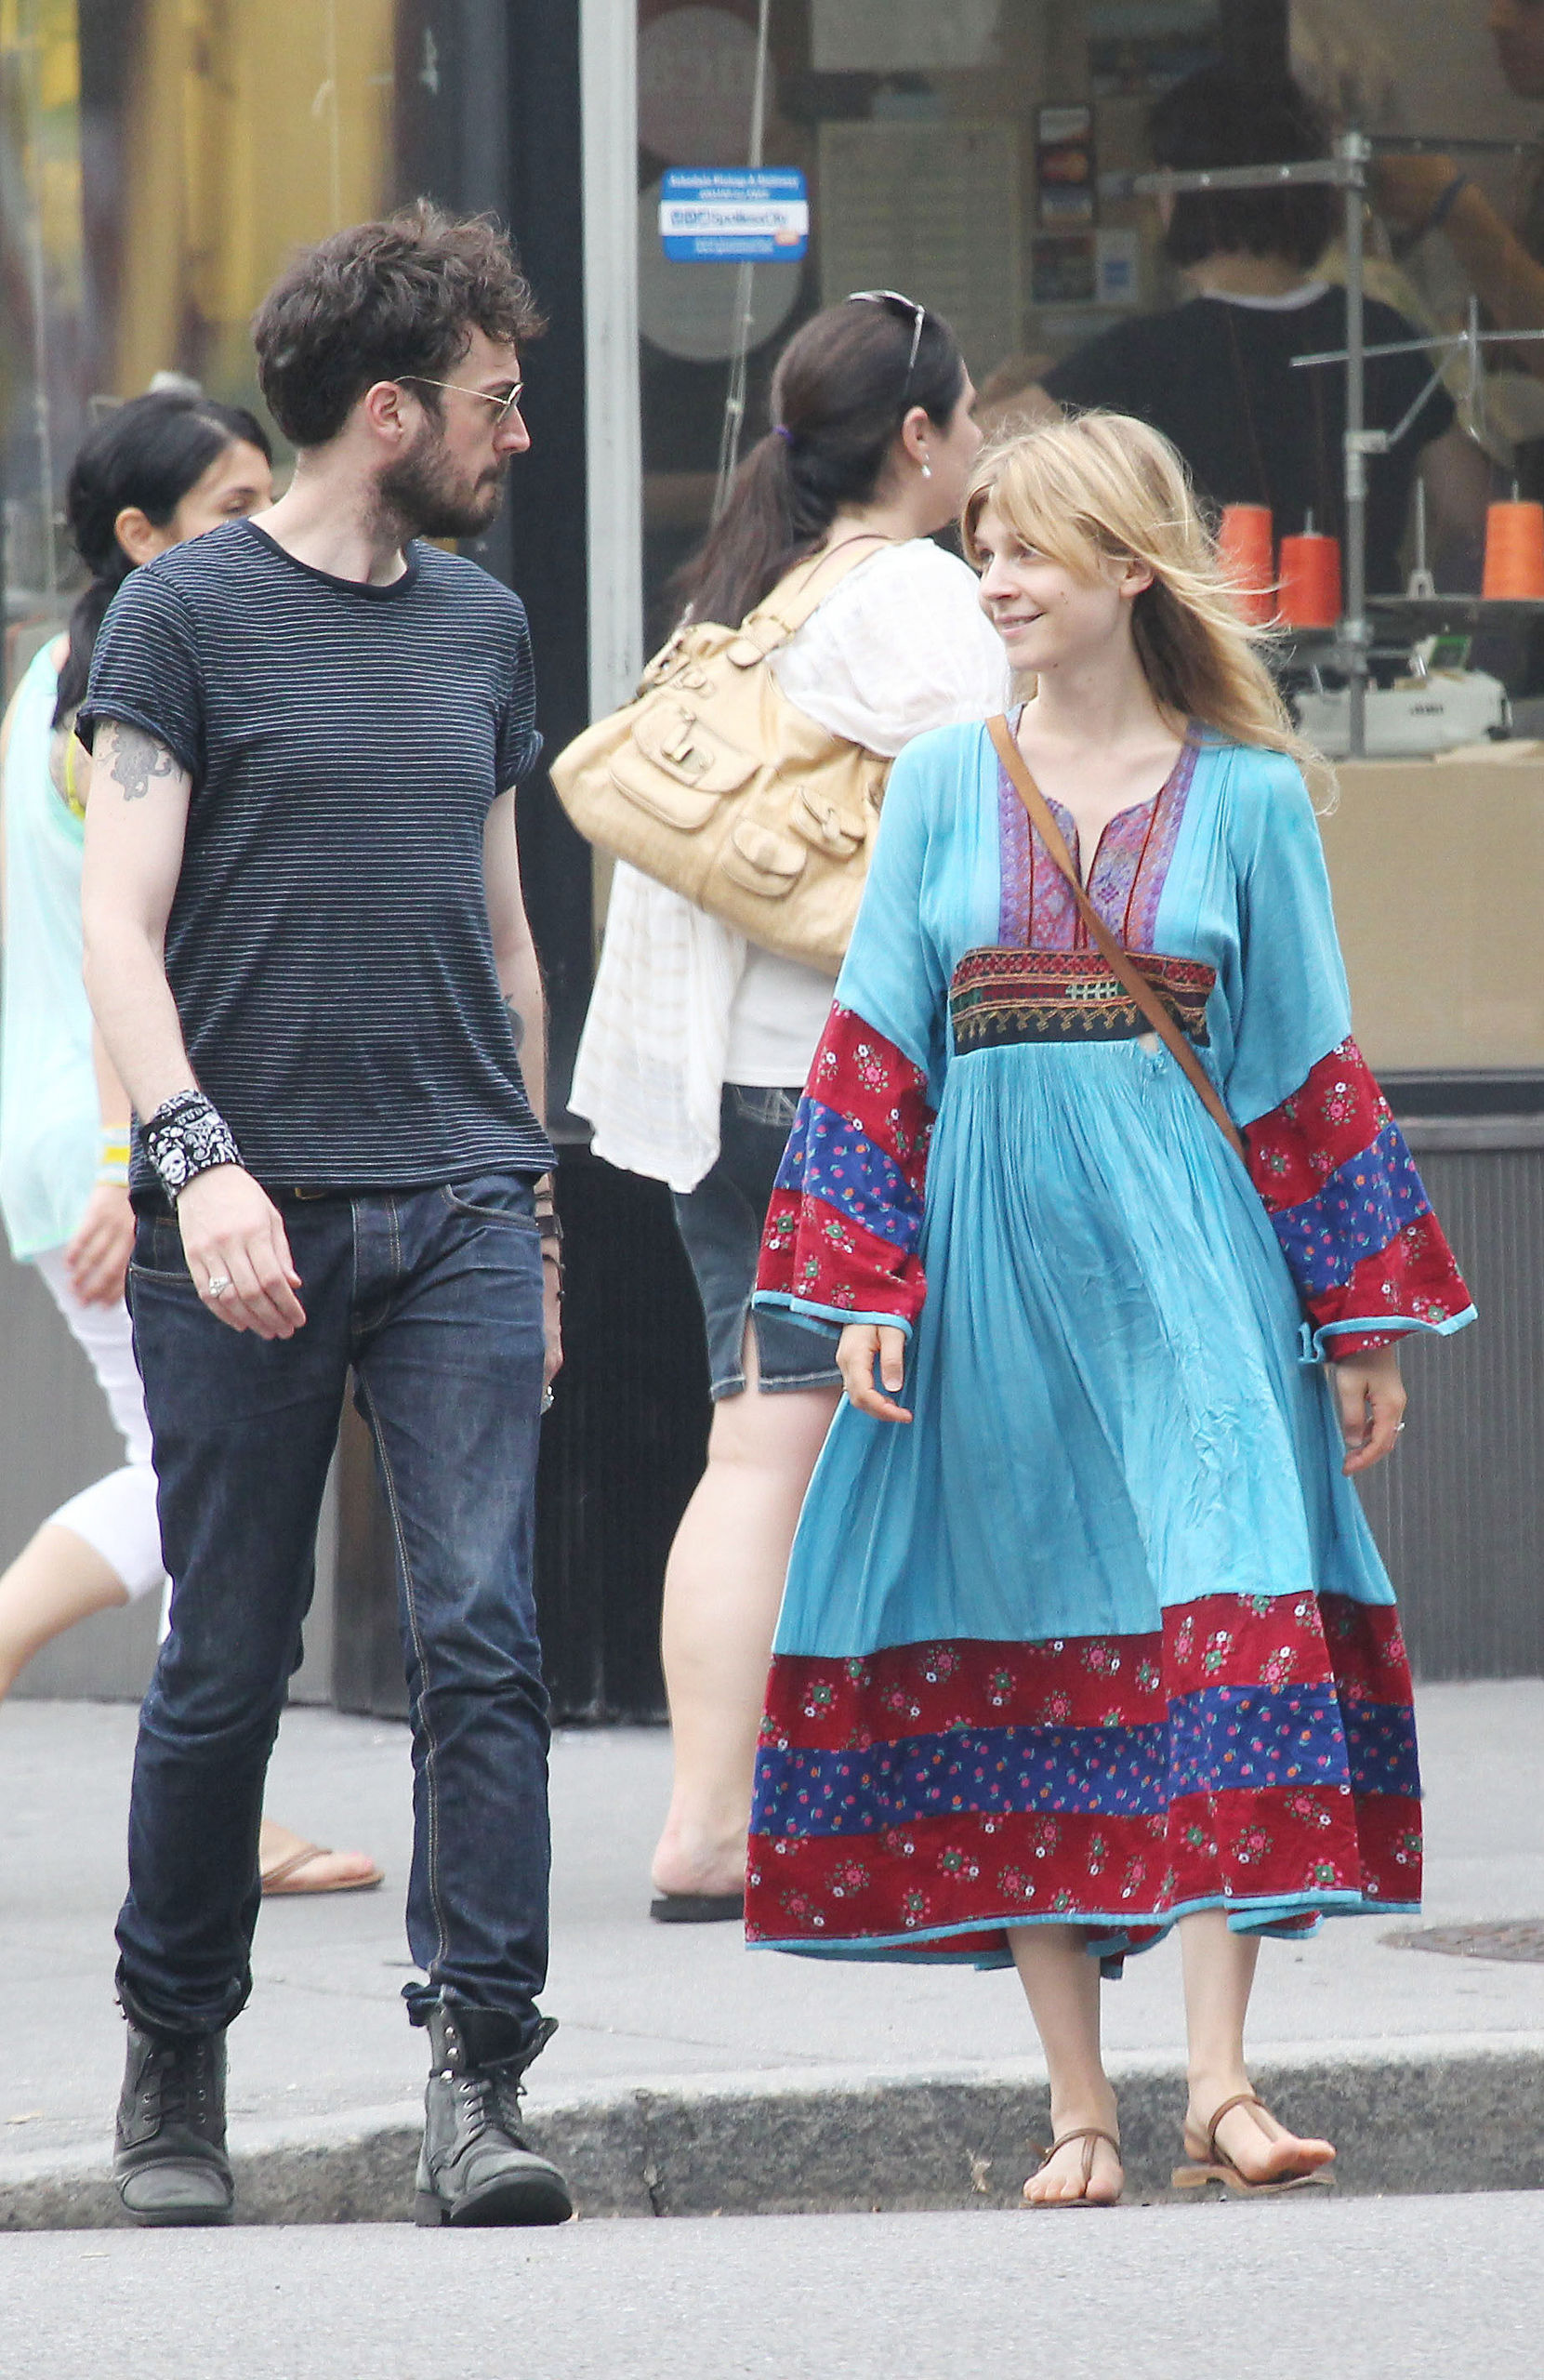 Clemence Poesy Photo: Out in New York - May 26, 2012.